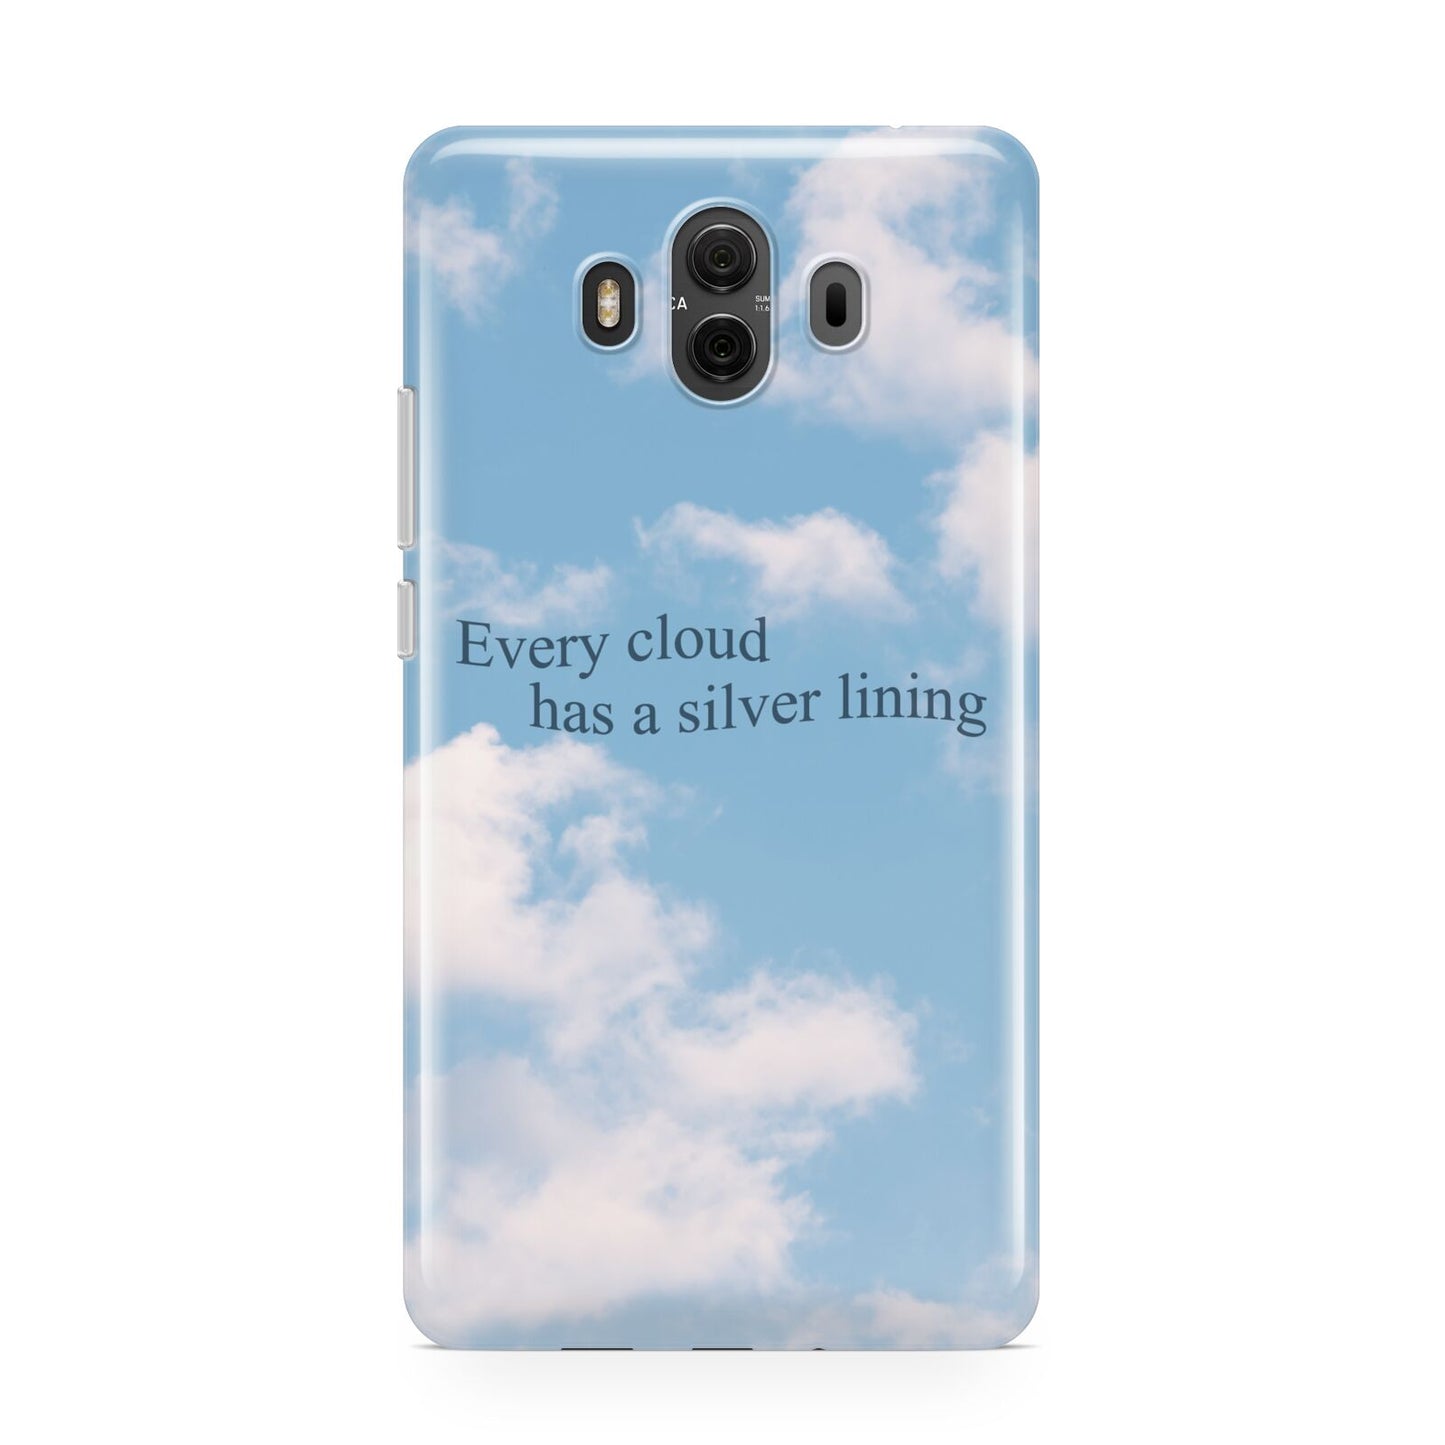 Positivity Huawei Mate 10 Protective Phone Case